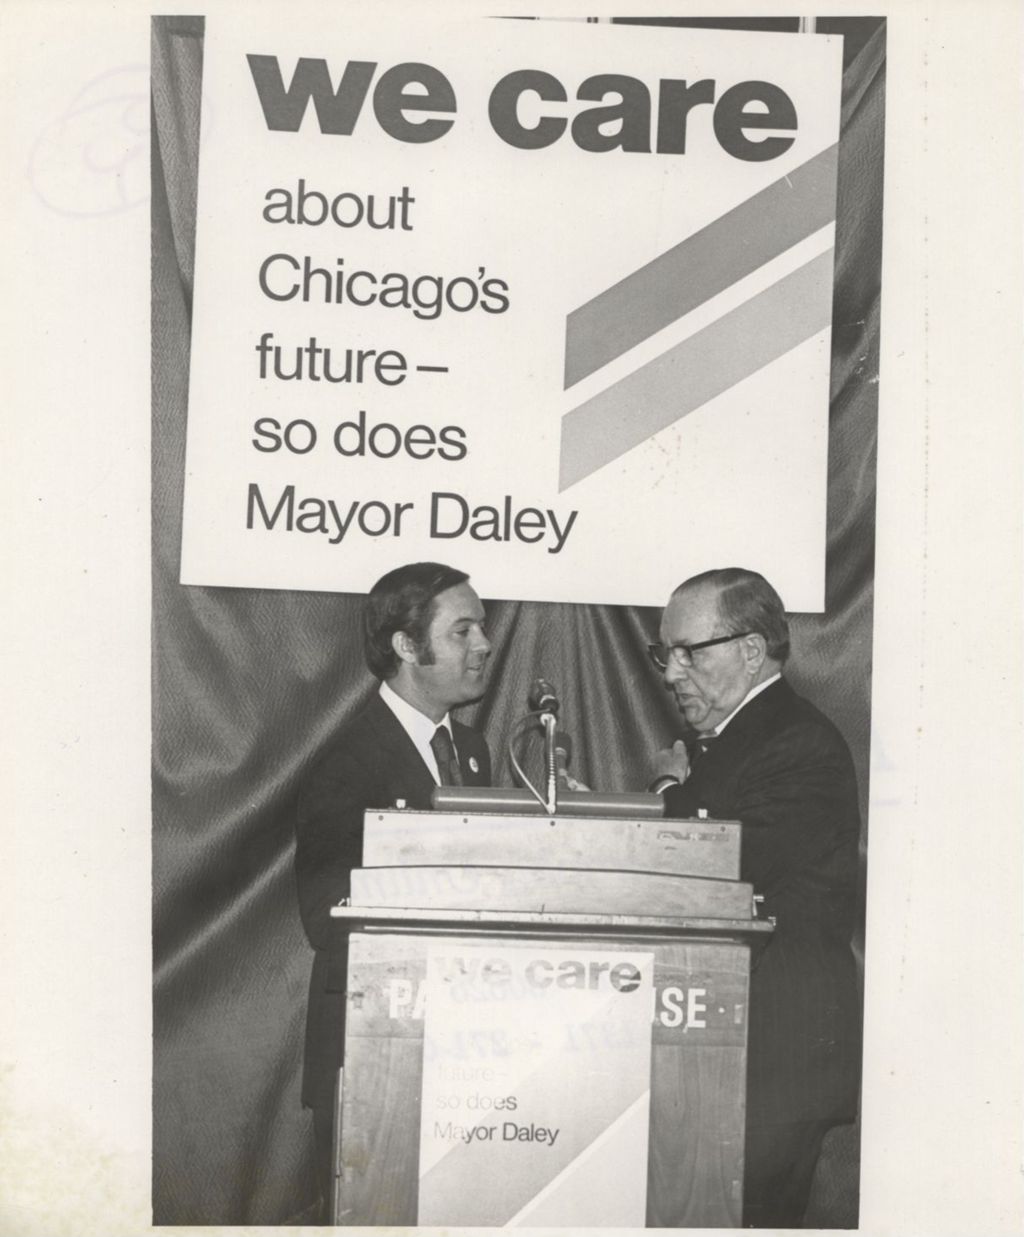 Richard J. Daley behind a podium at a "We Care" event